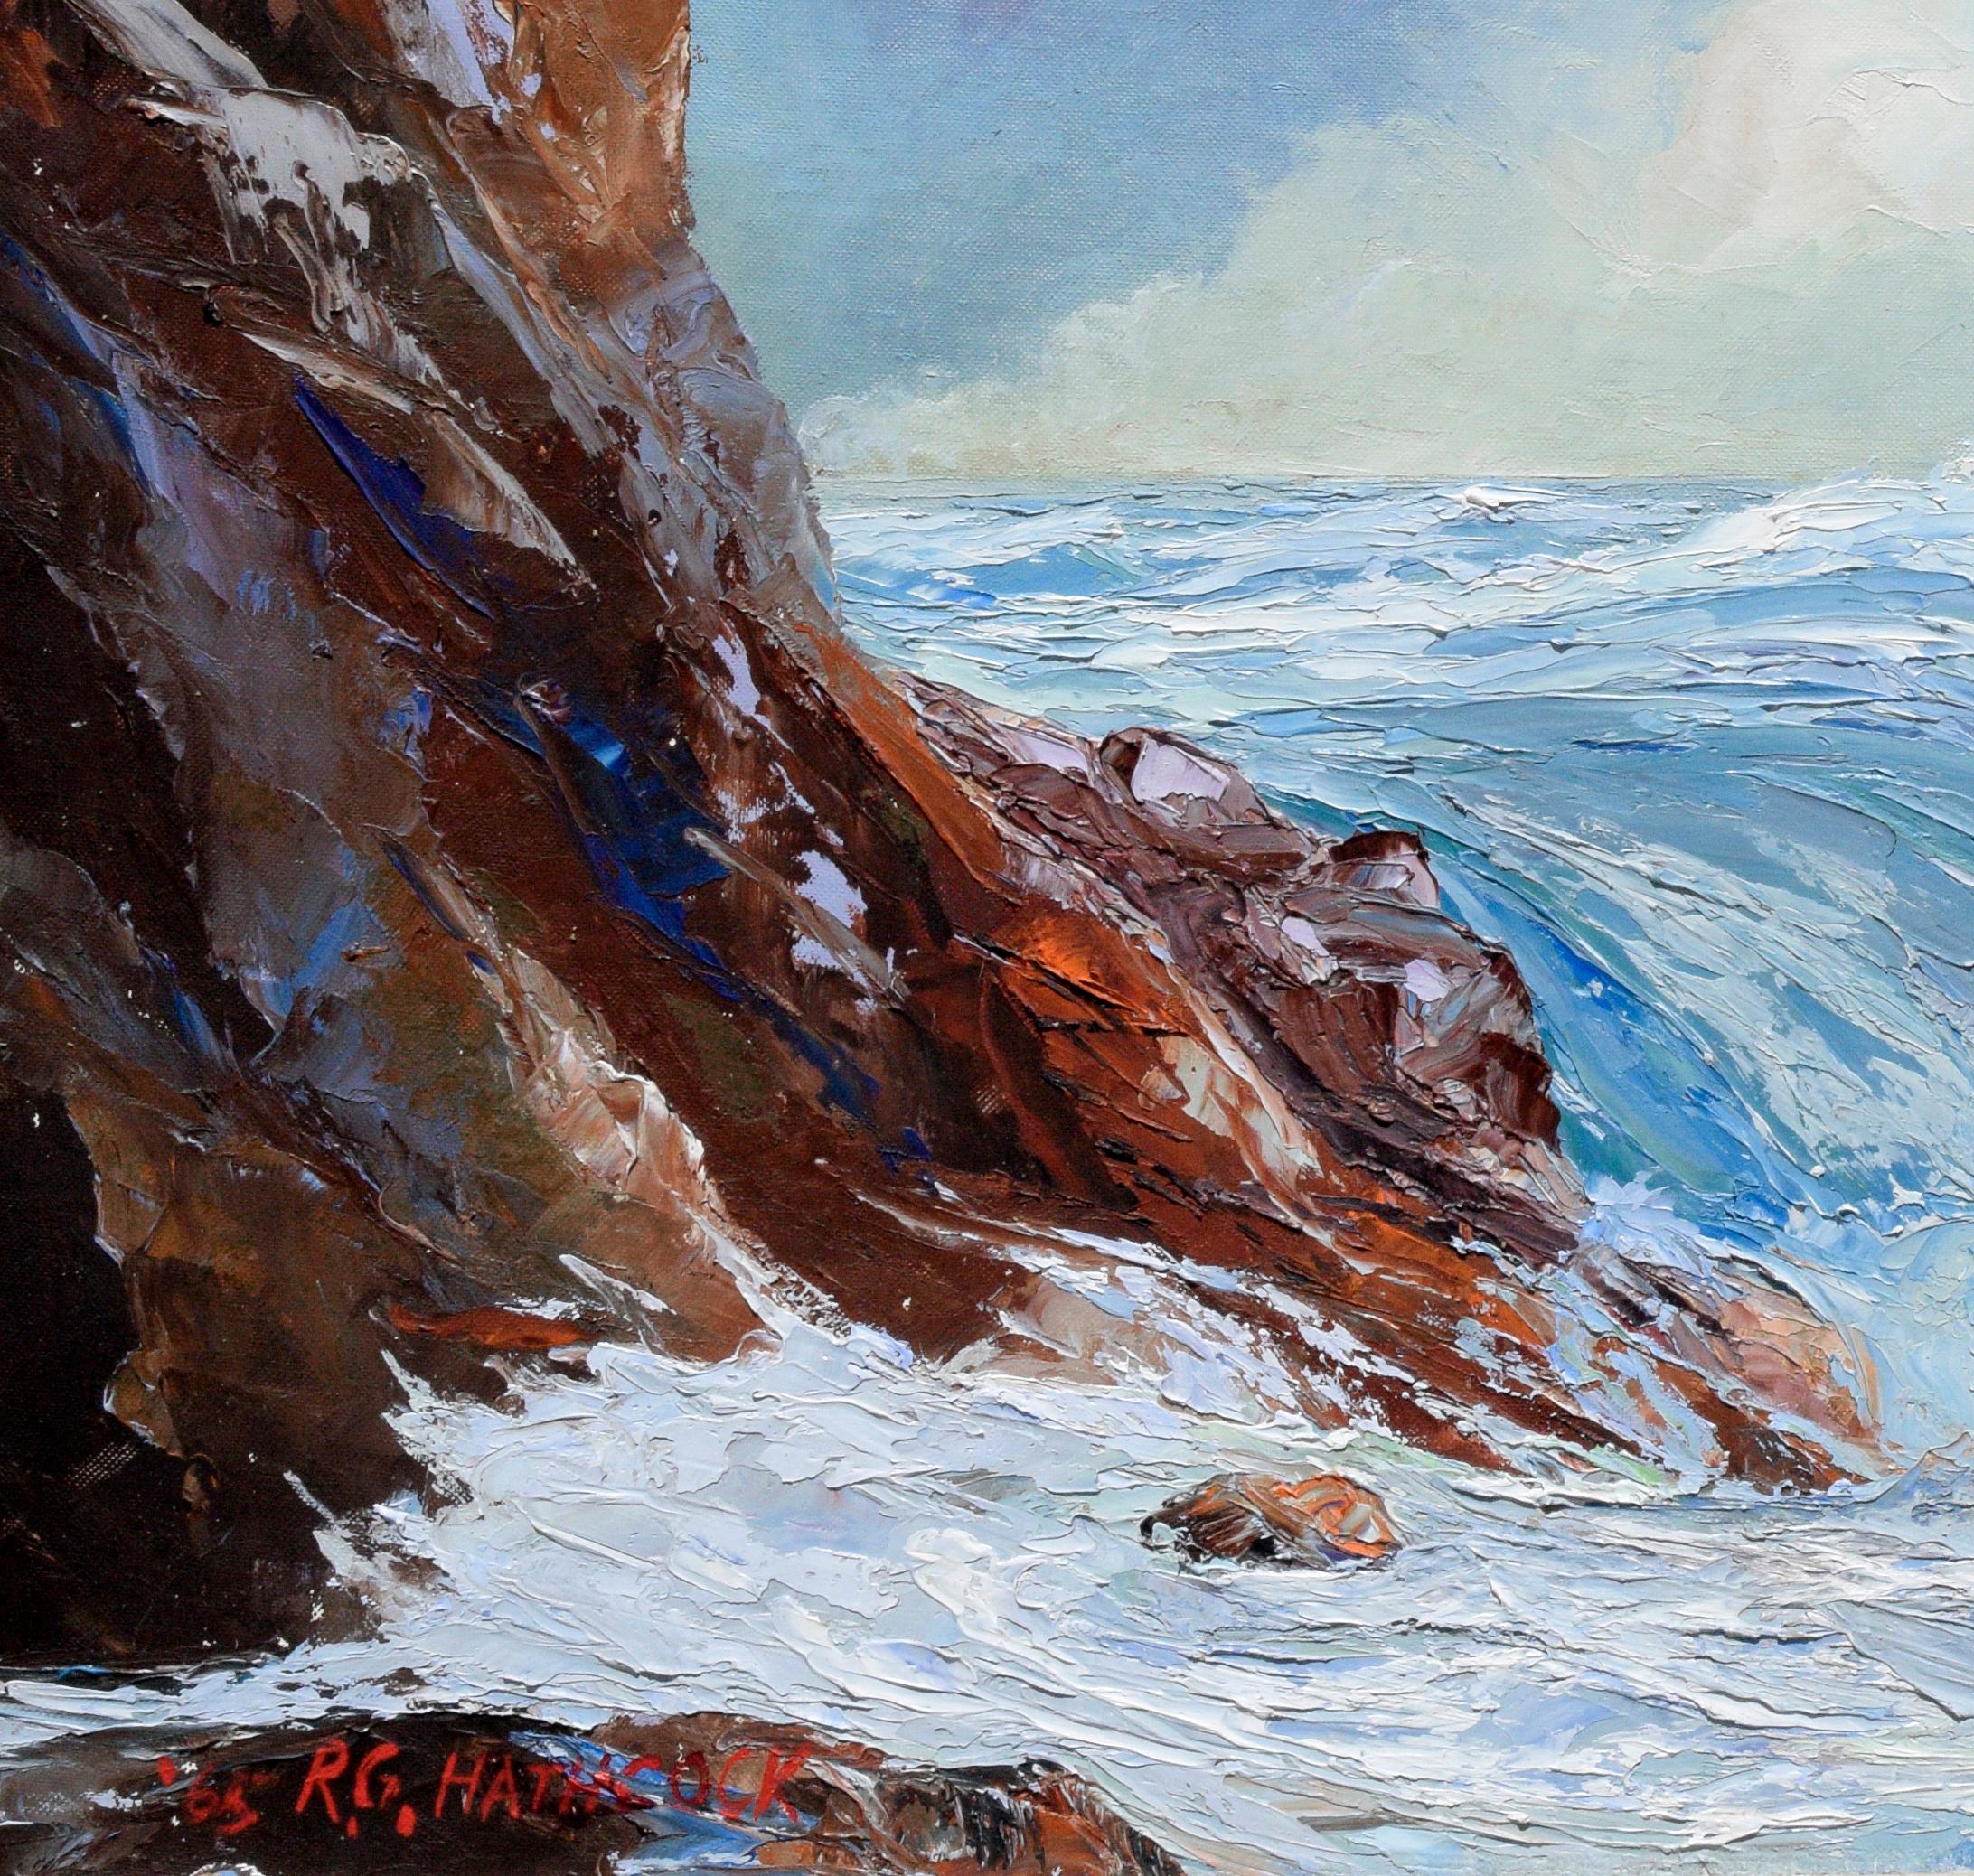 California Ocean Scene Seascape - American Impressionist Painting by R.G. Hathcock